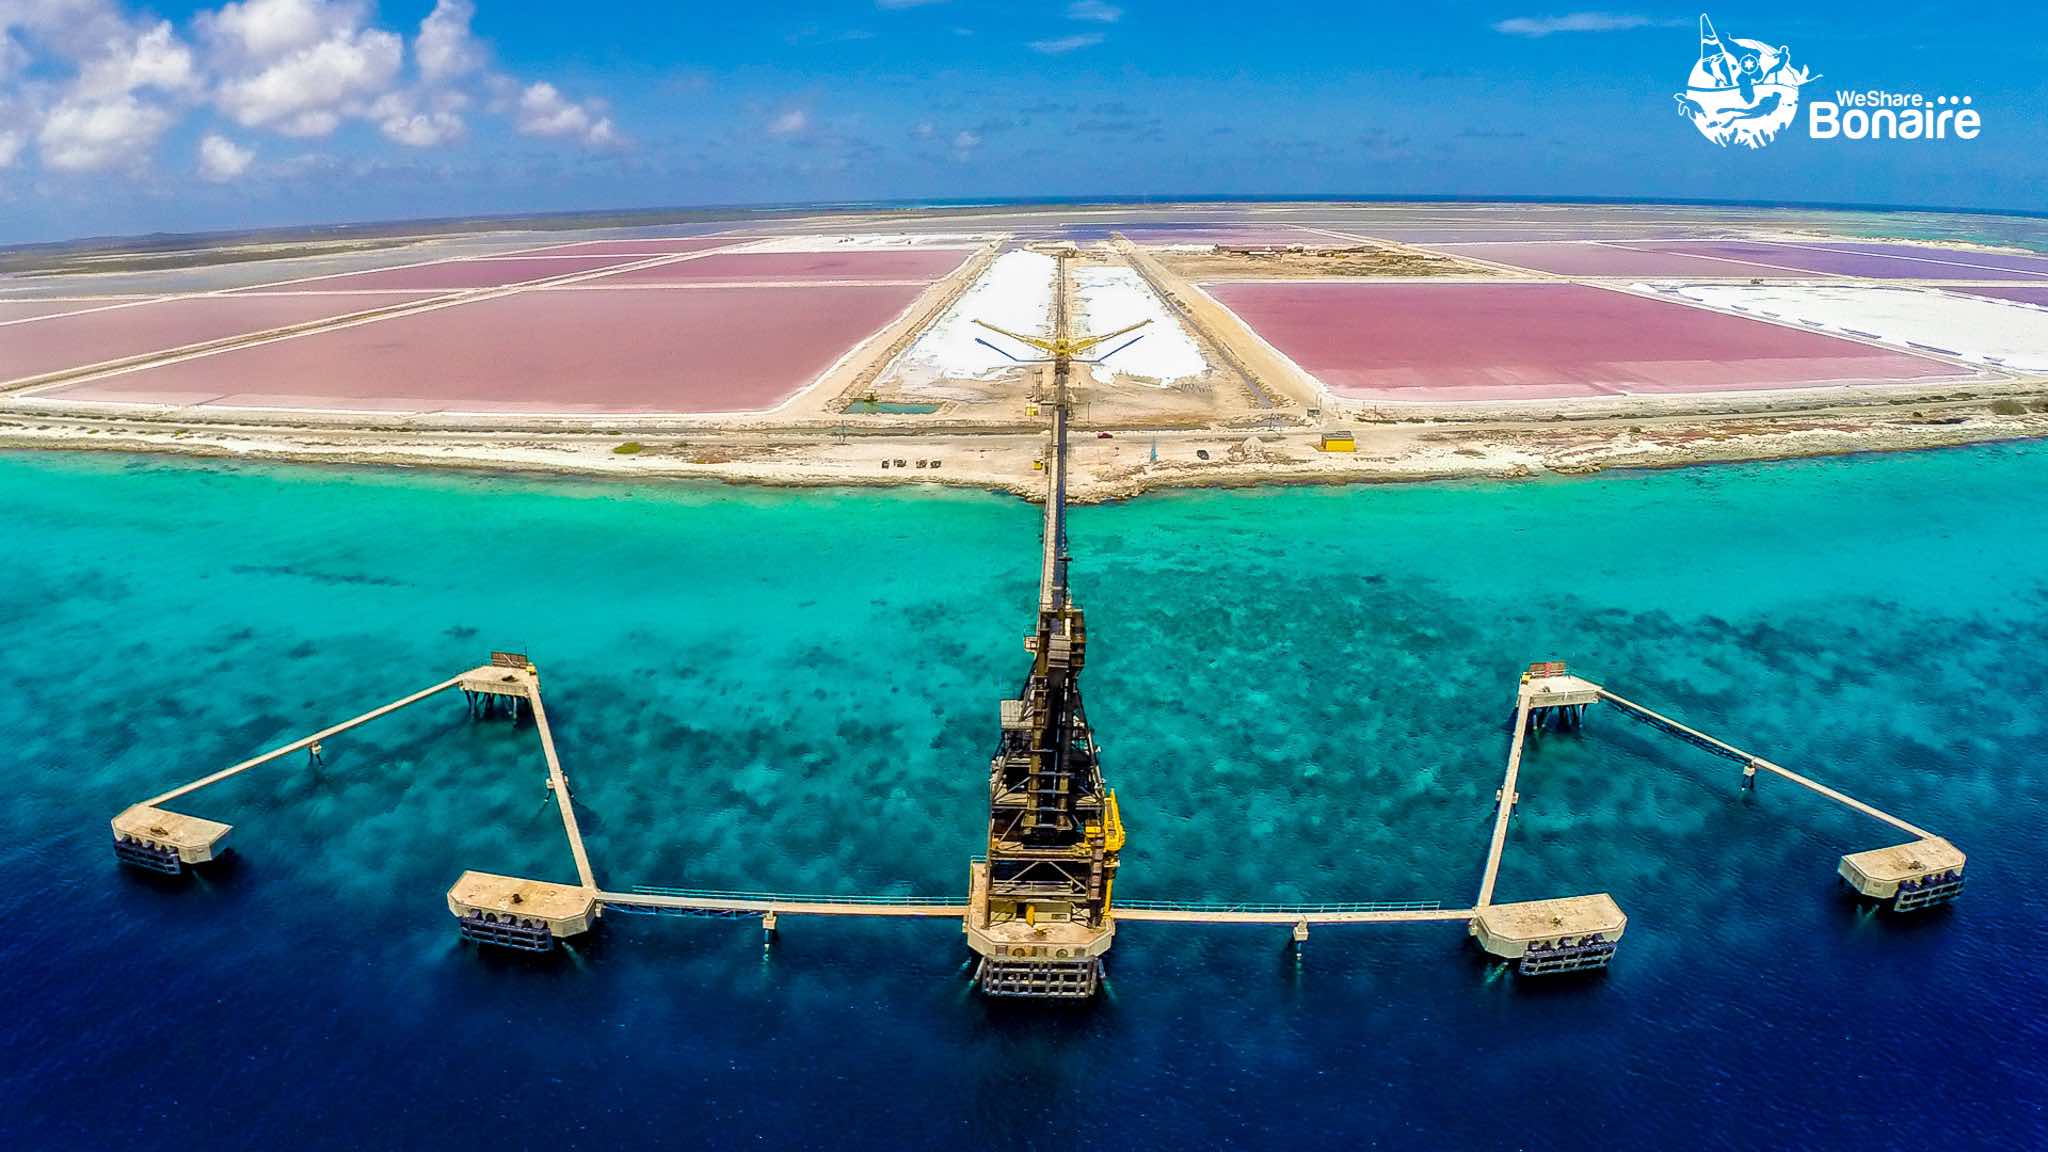 Drone image capturing the expansive view of the Salt Pier on Bonaire, showcasing its structure amidst the azure waters.